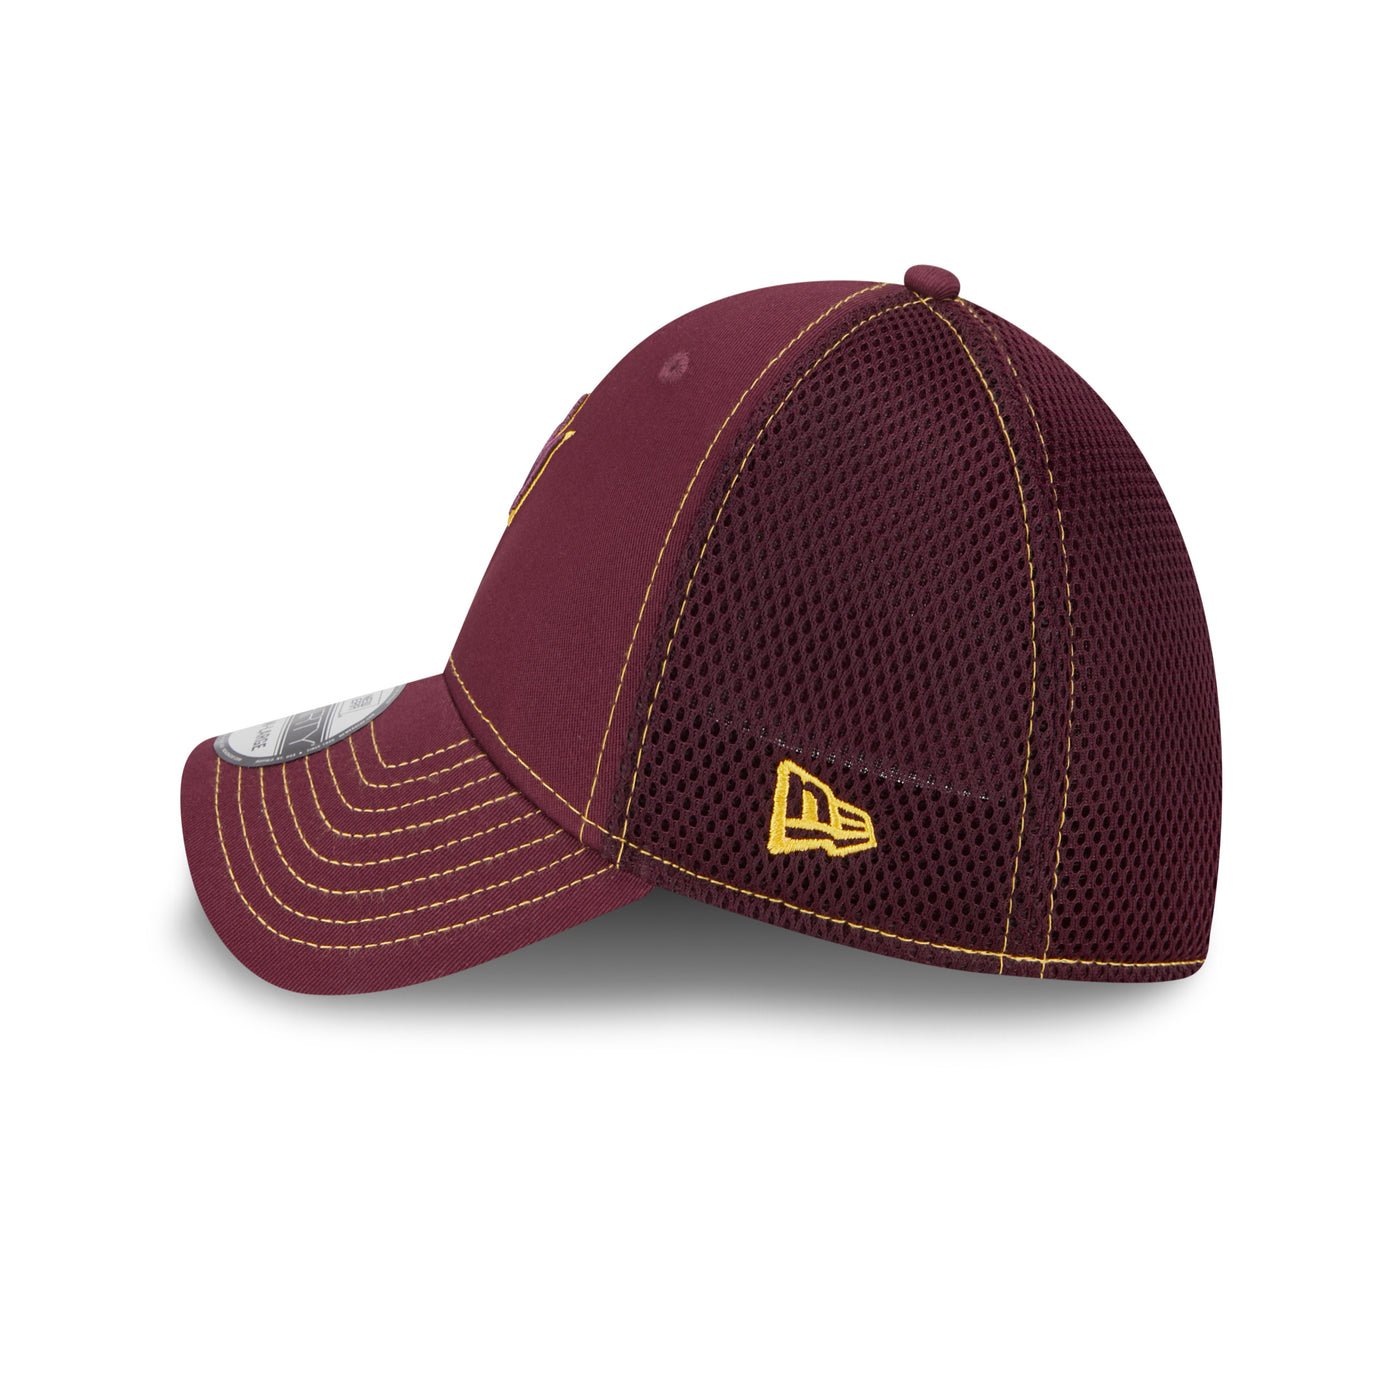 Side view of  ASU maroon strectch fit hat with darker maroon mesh on back panels and a gold outlined pitchfork on the front